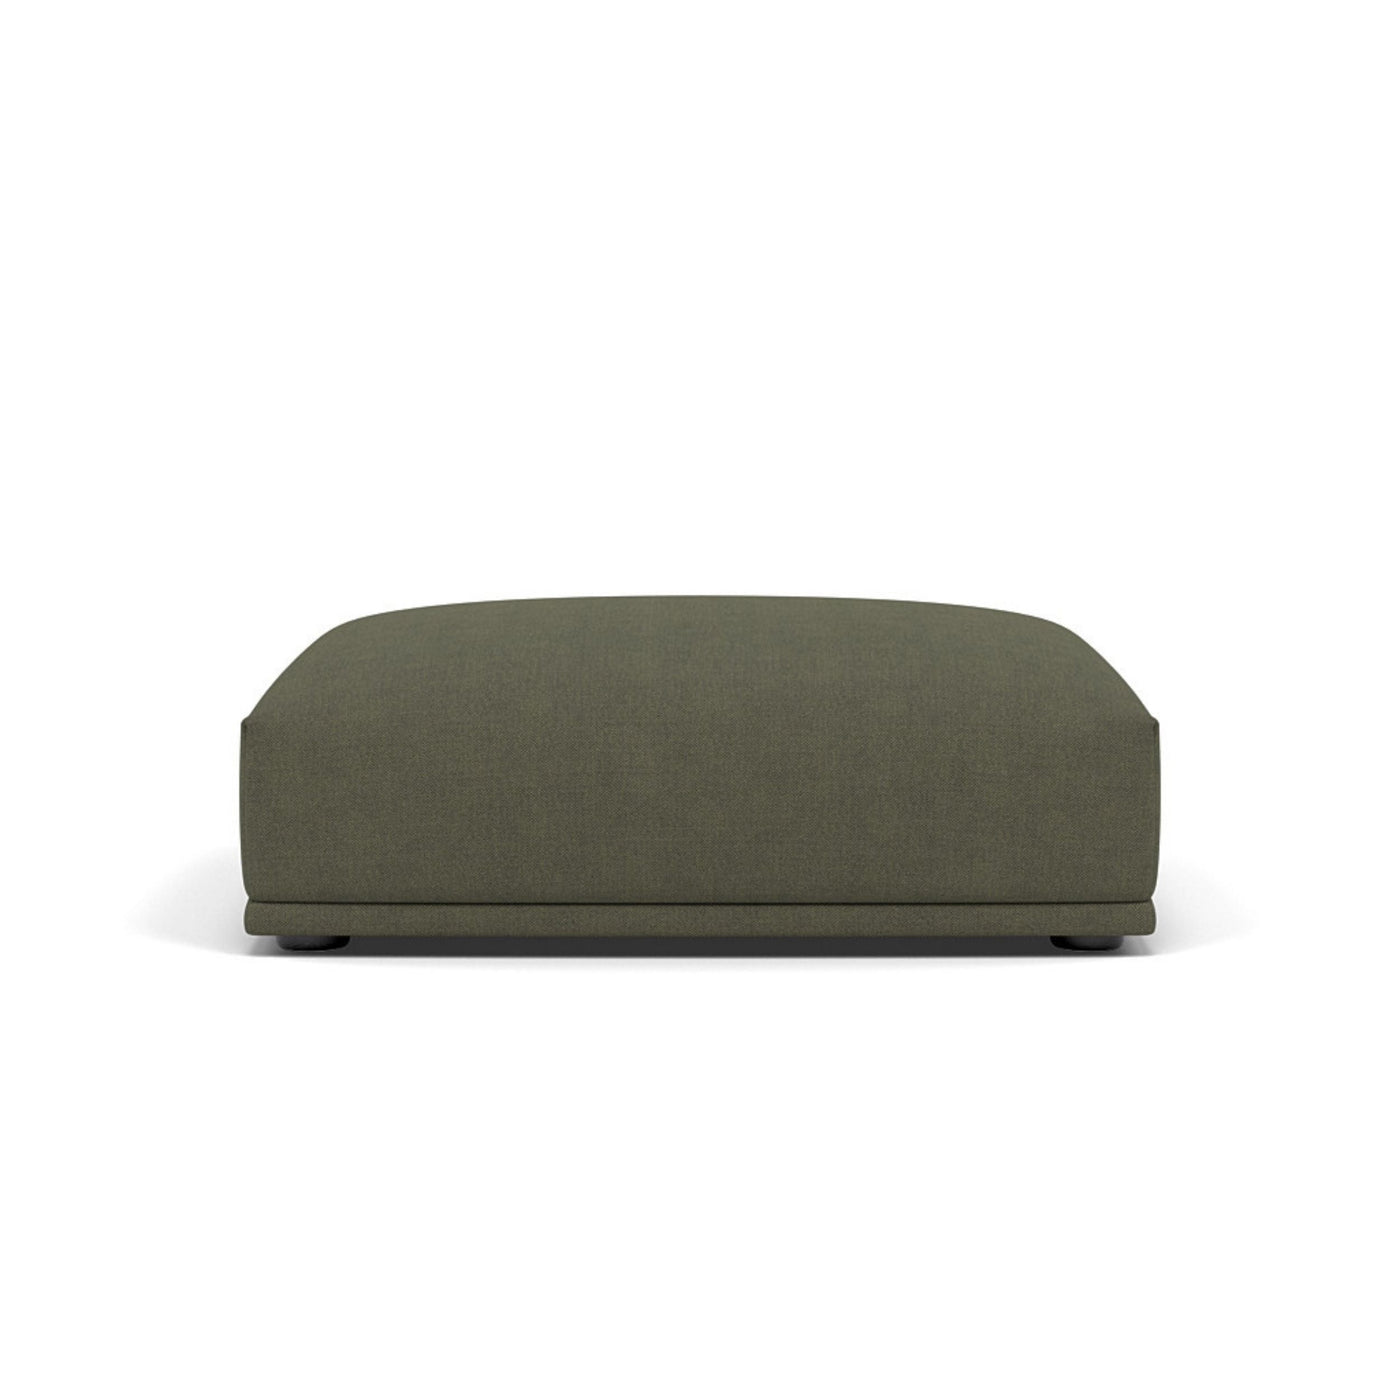 Muuto Connect Modular Sofa System, module h, long ottoman, fiord 961 fabric. Available from someday designs. #colour_fiord-961